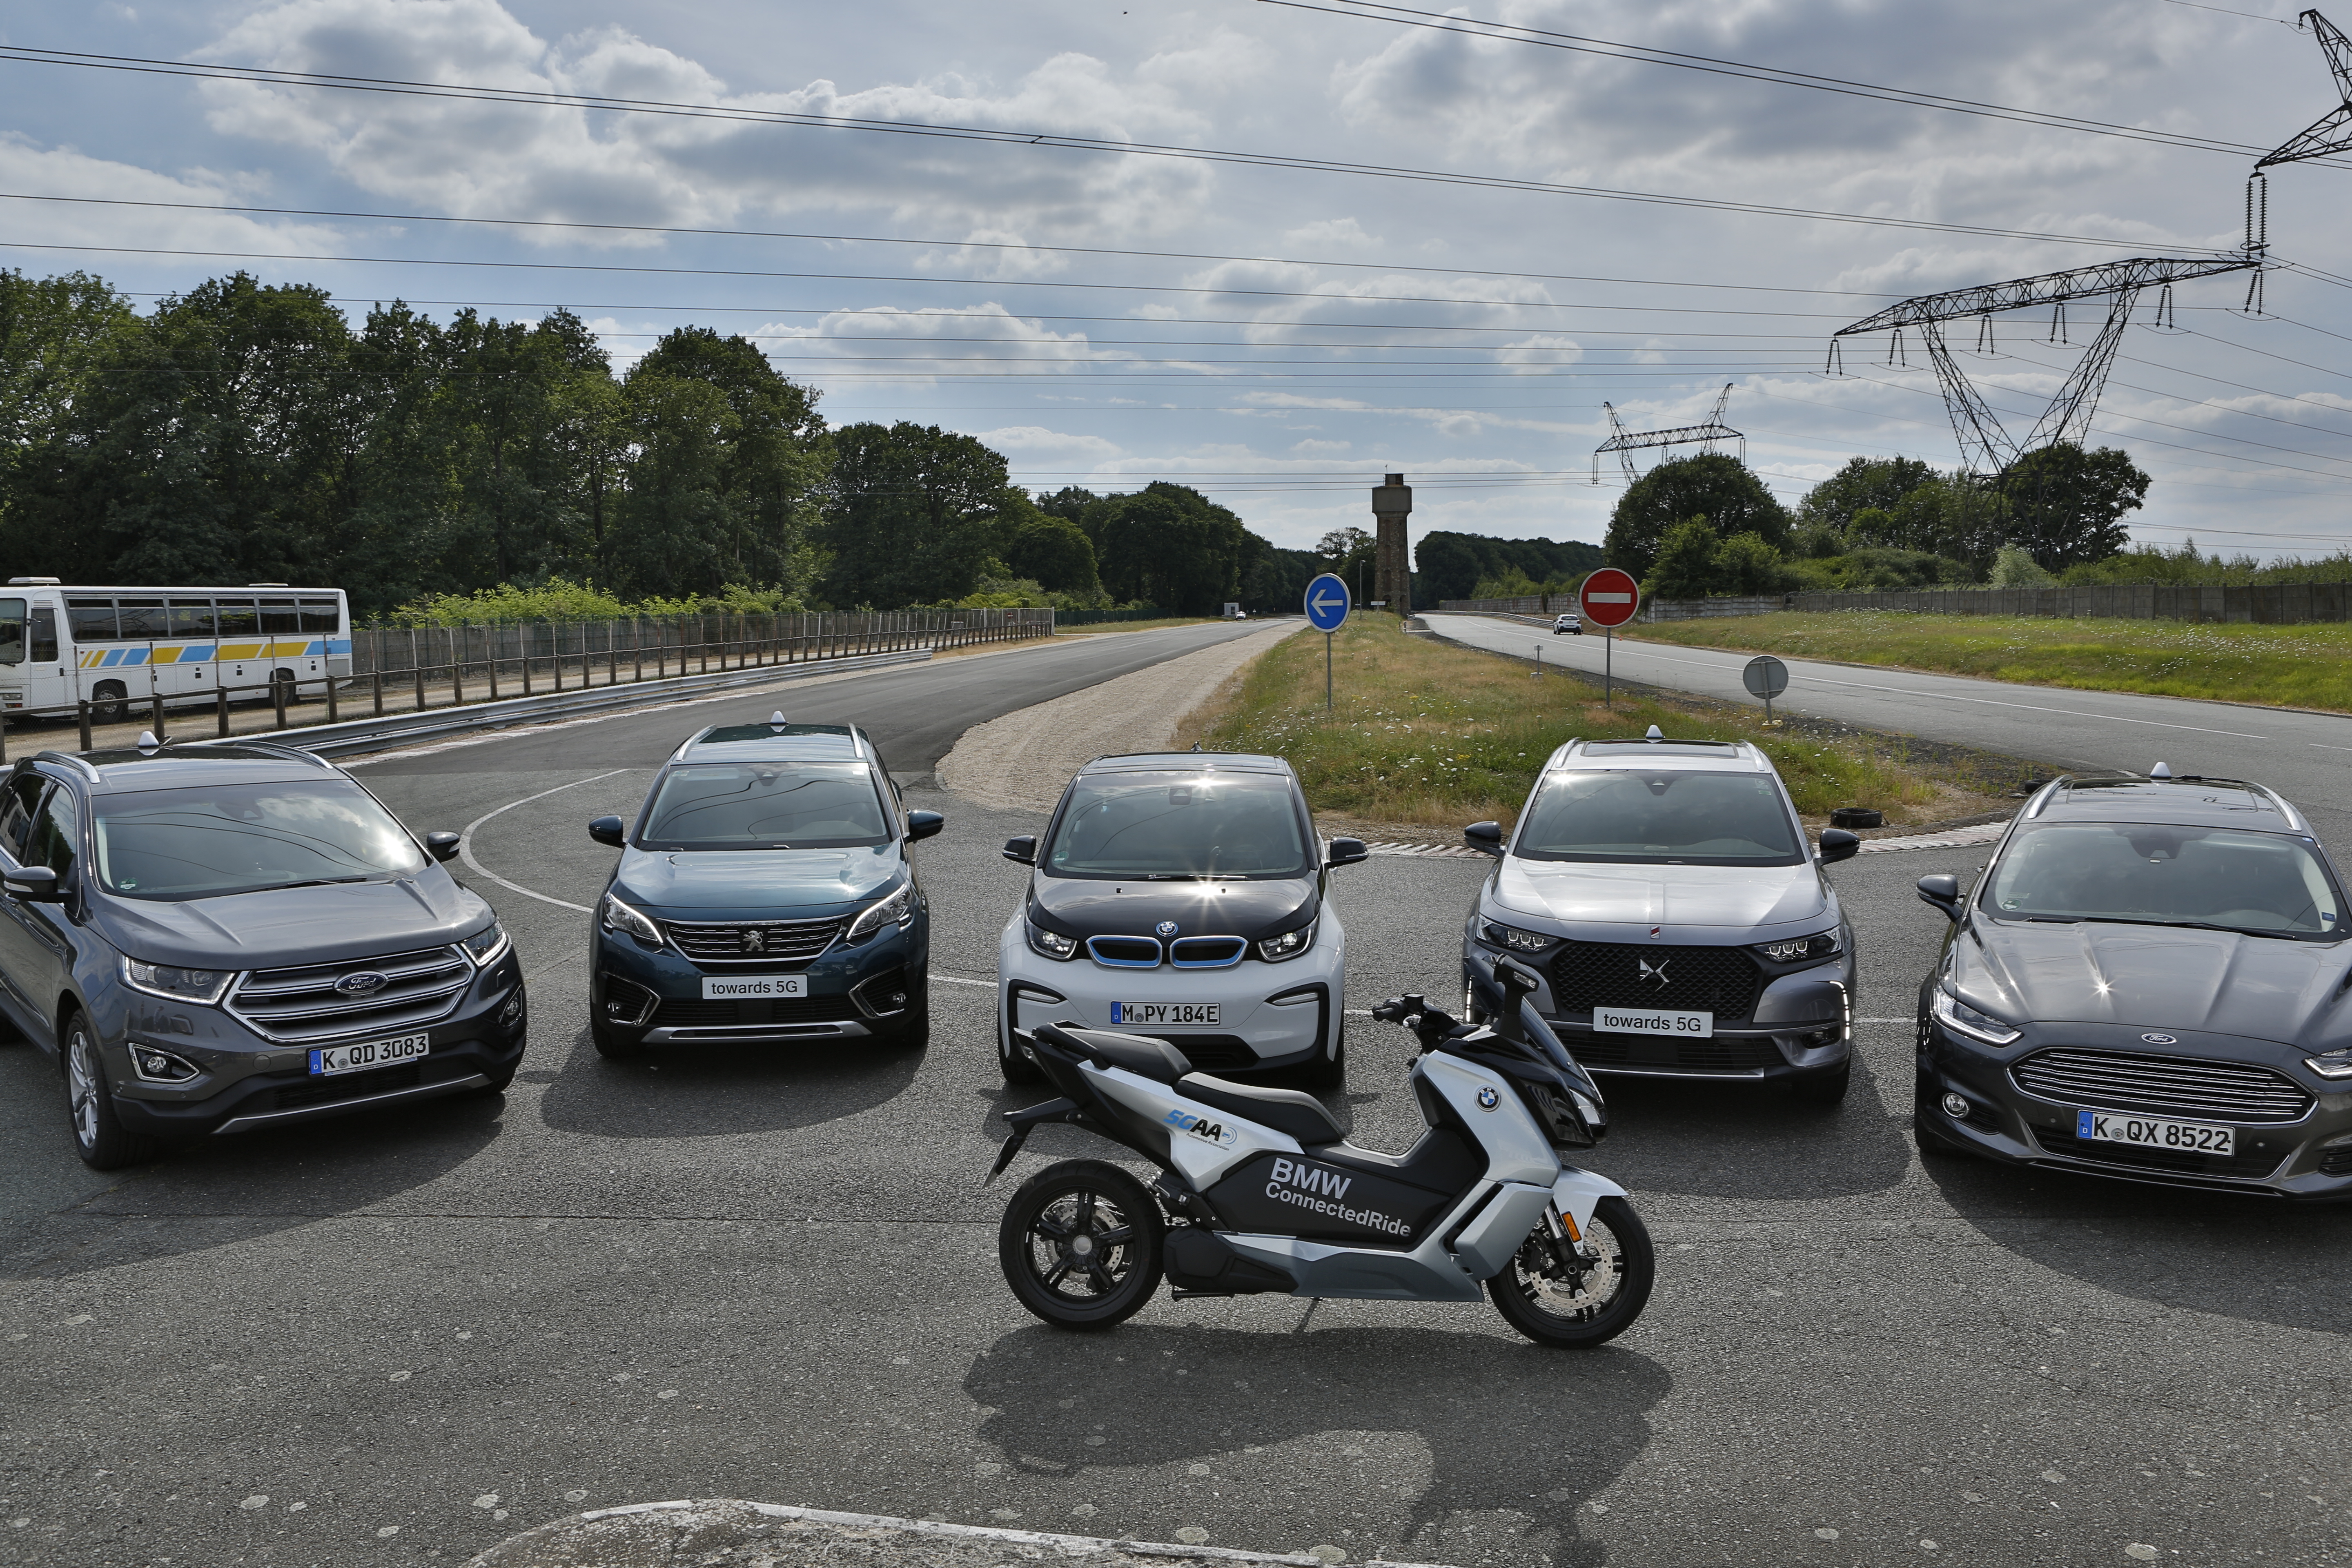 5GAA, BMW Group, Ford and Groupe PSA exhibit first European demonstration of C-V2X direct communication interoperability between multiple automakers - IEEE Connected Vehicles